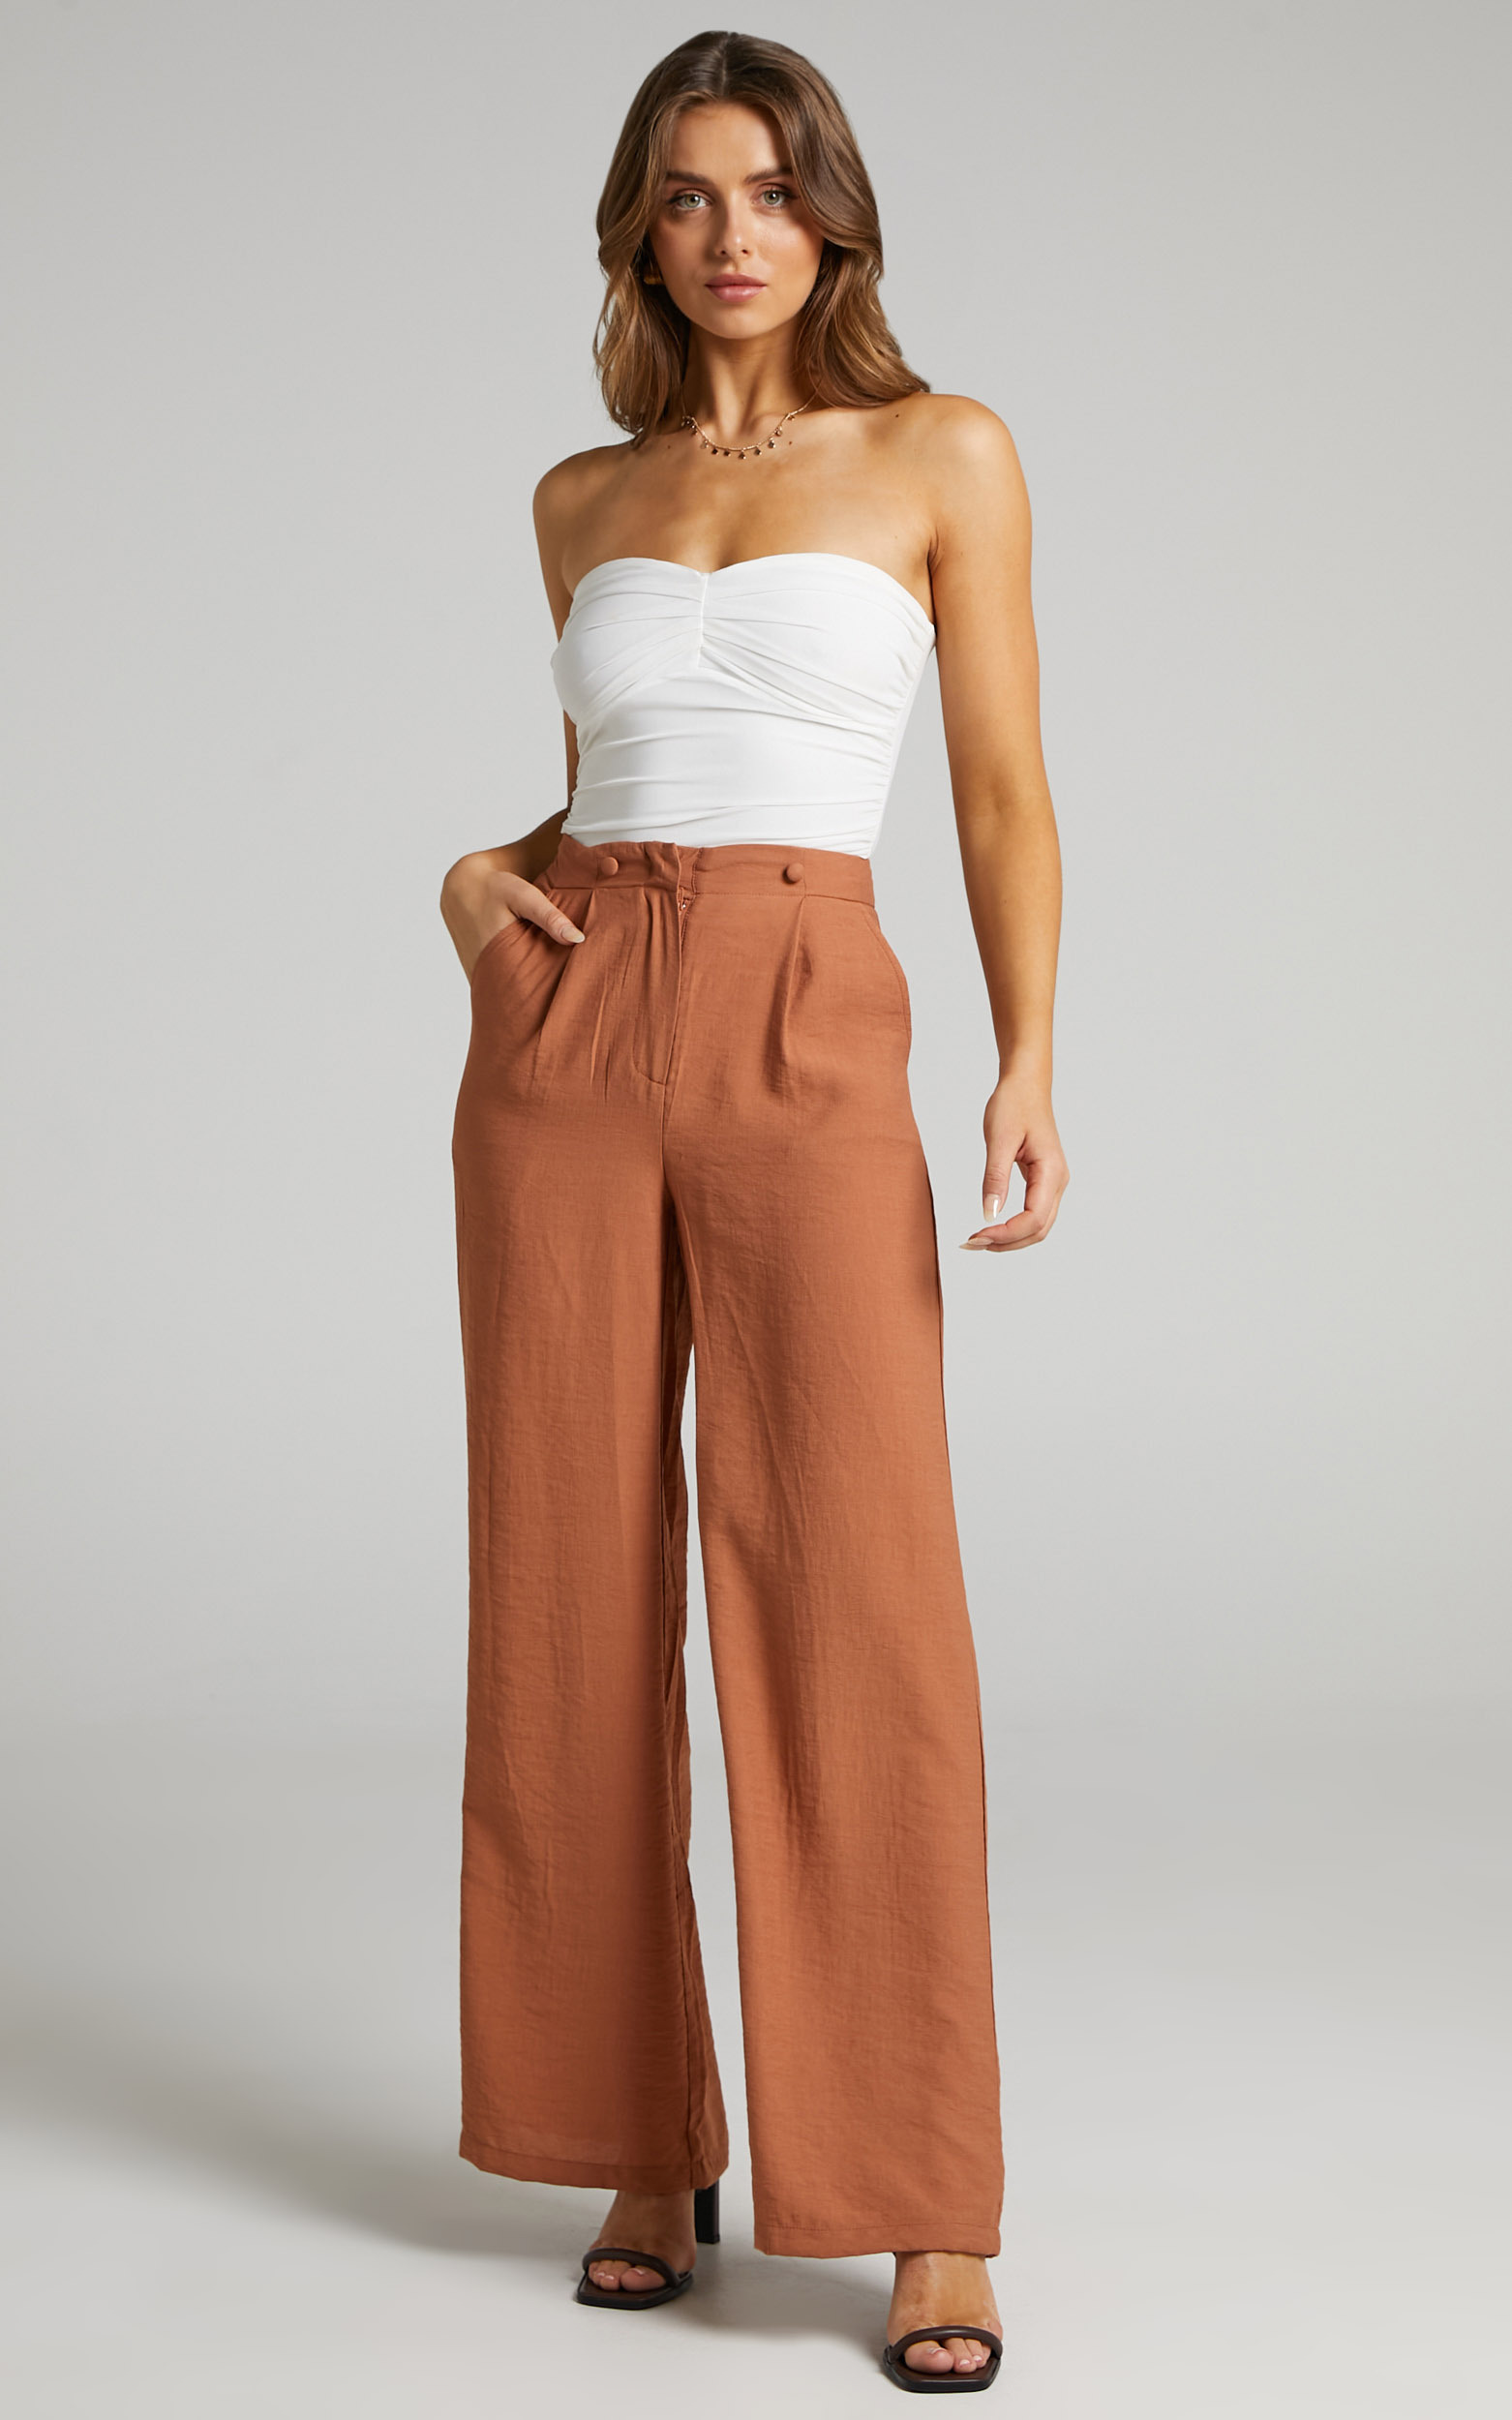 Nathan Double Button Pleated Wide Leg Pant in Brown Linen - 06, BRN1, hi-res image number null